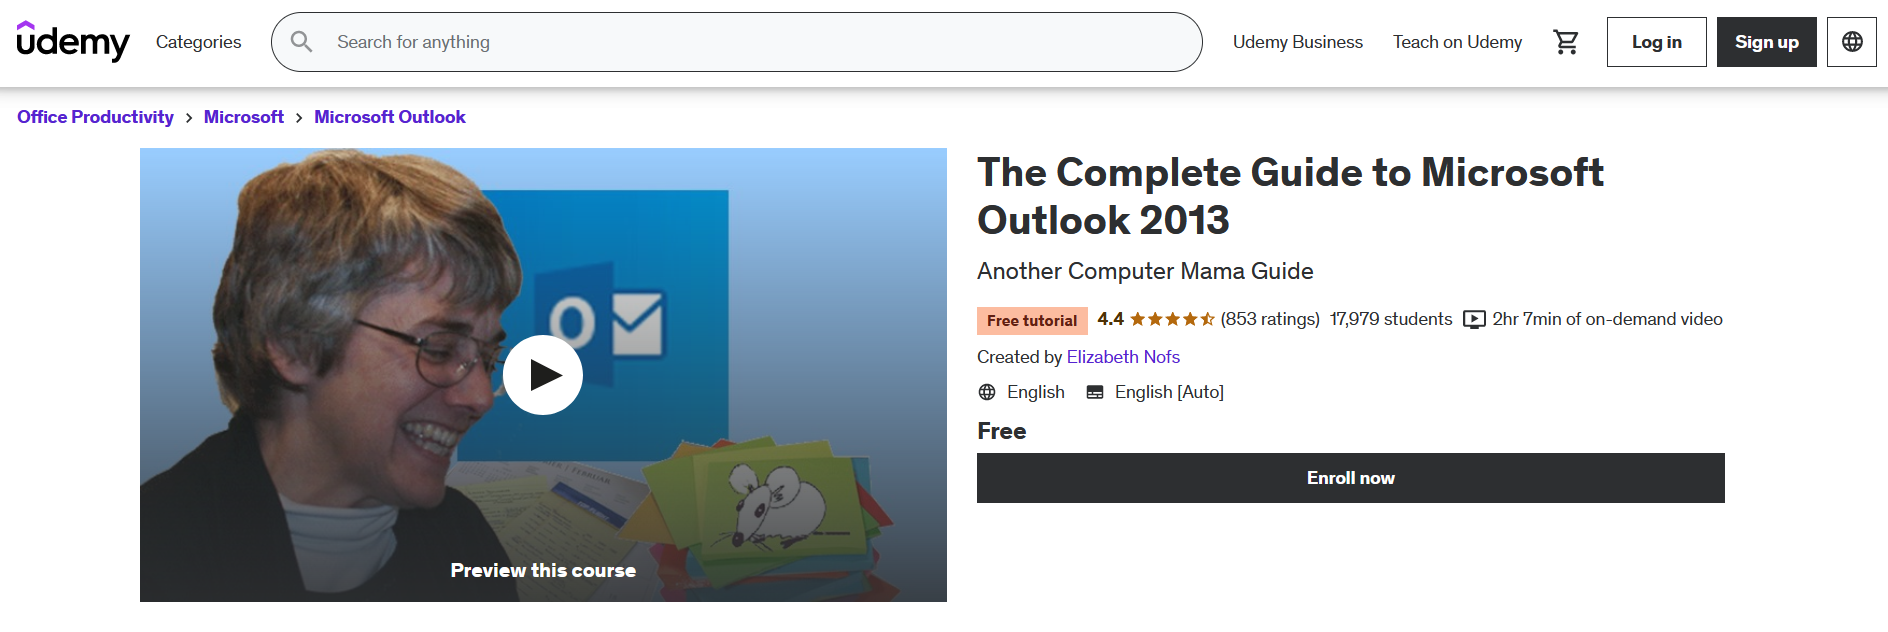 The Complete Guide to Microsoft Outlook 2013 via Udemy